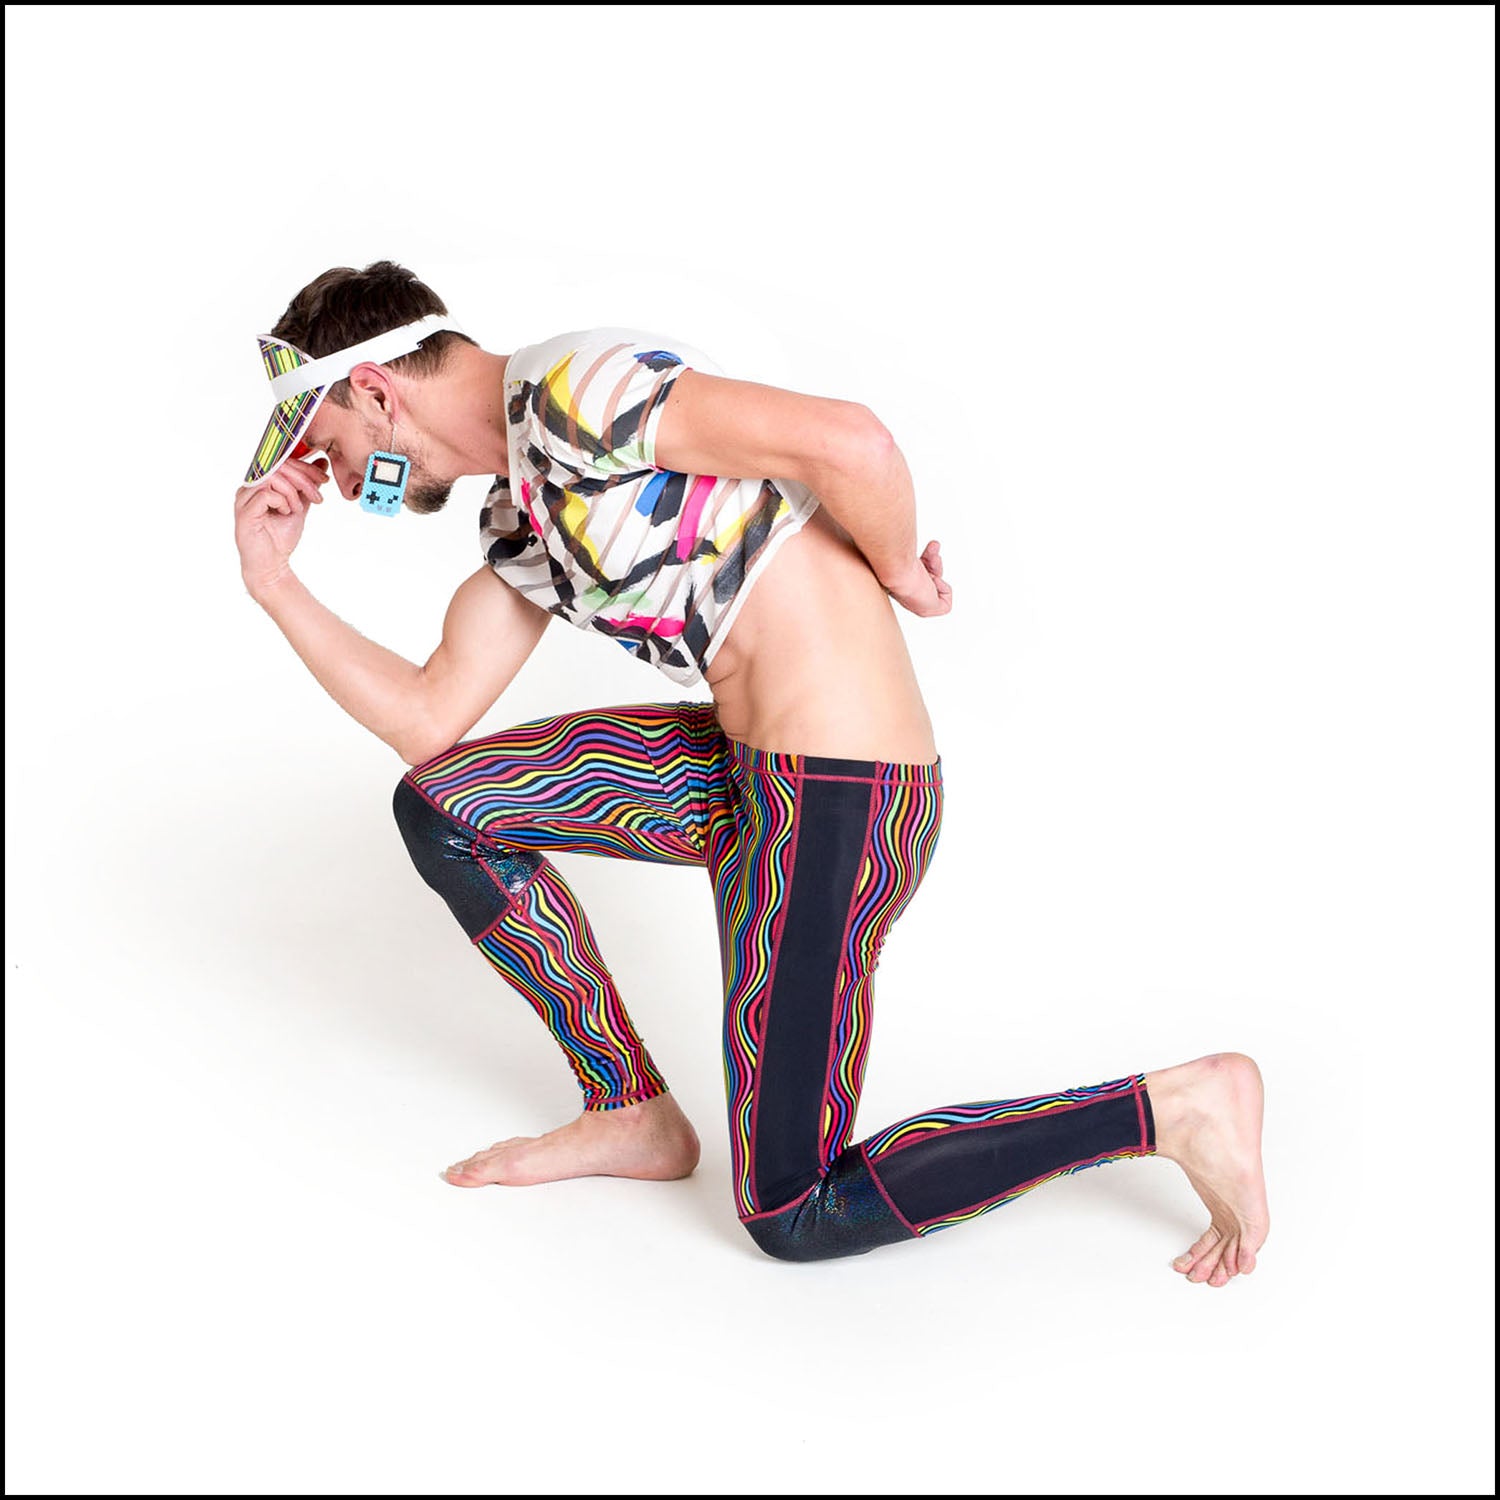 Twisted Leggings, a handmade-to-order piece in rainbow groovy stripe printed spandex. These funky leggings are both stylish and sustainable. The unisex design features a high elasticated waistband and black hologram knee and side panels.